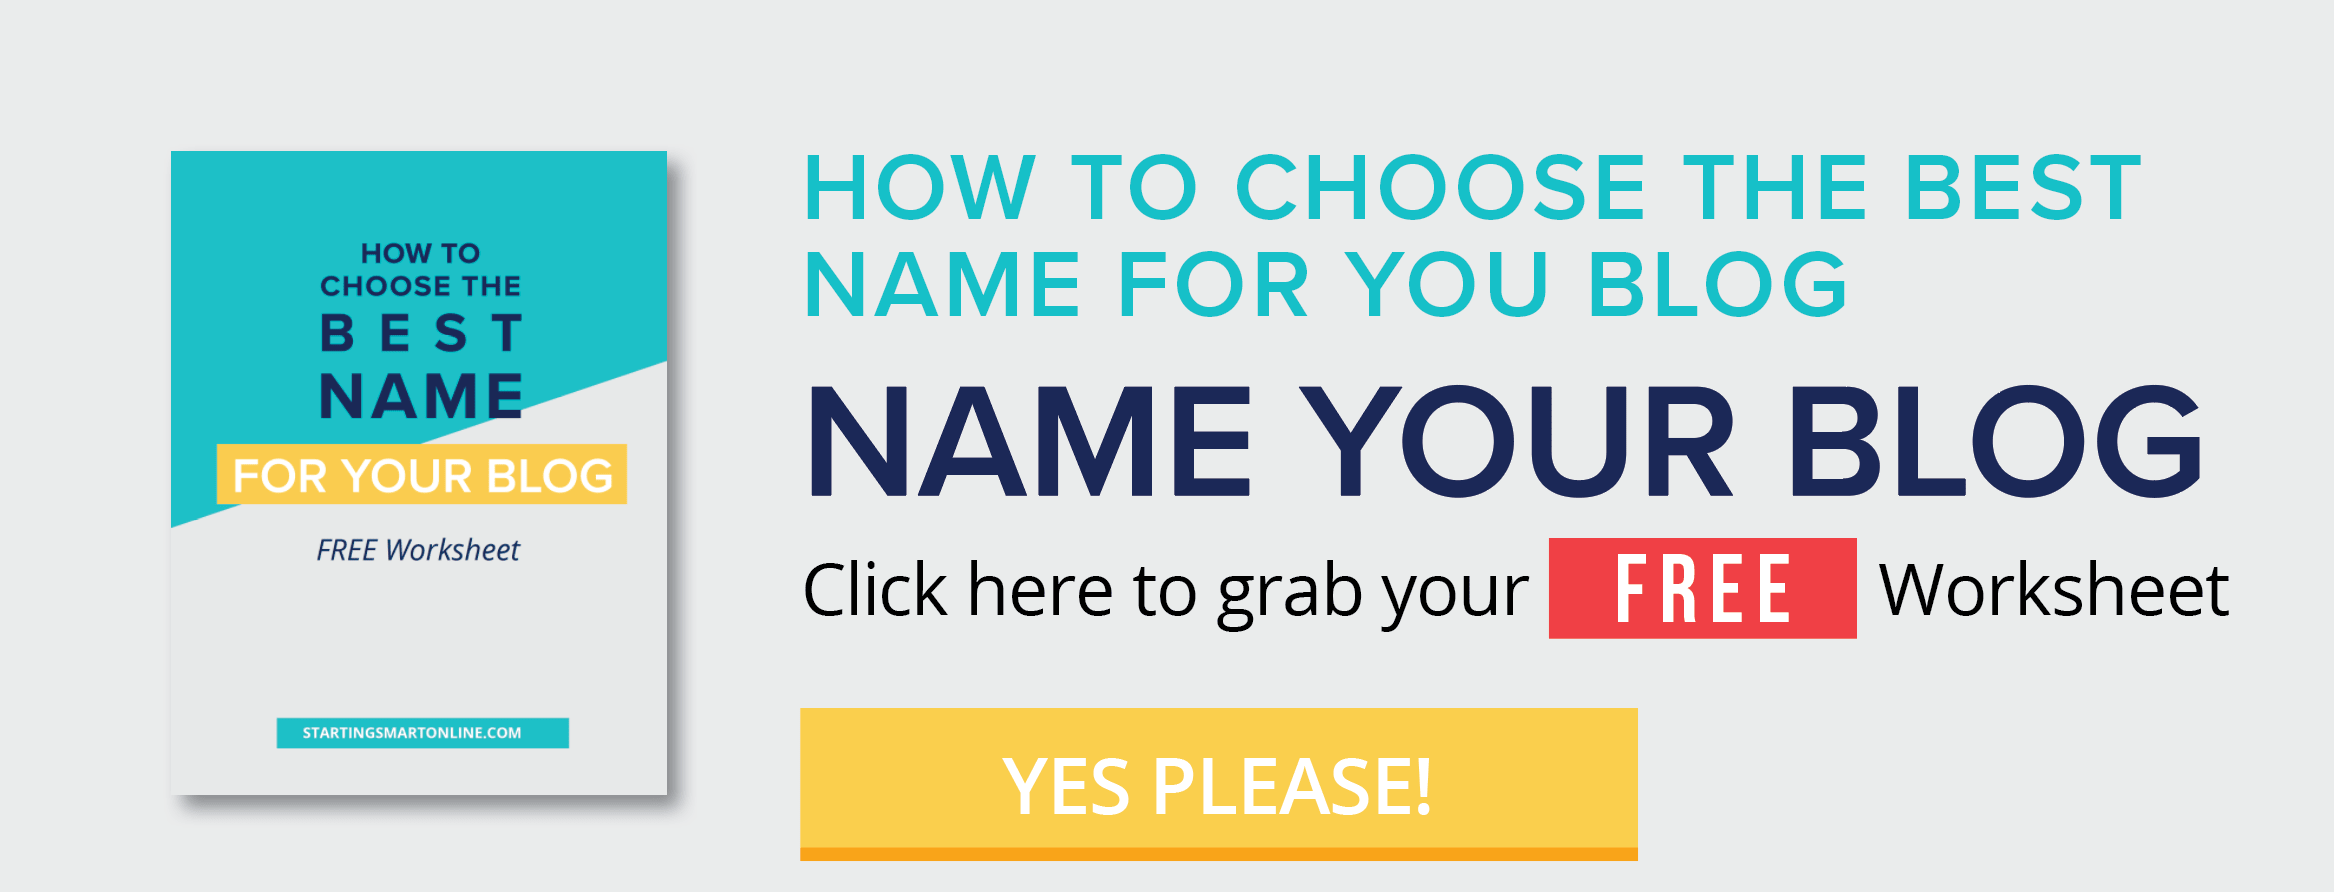 Choose the Best Name For Your Blog